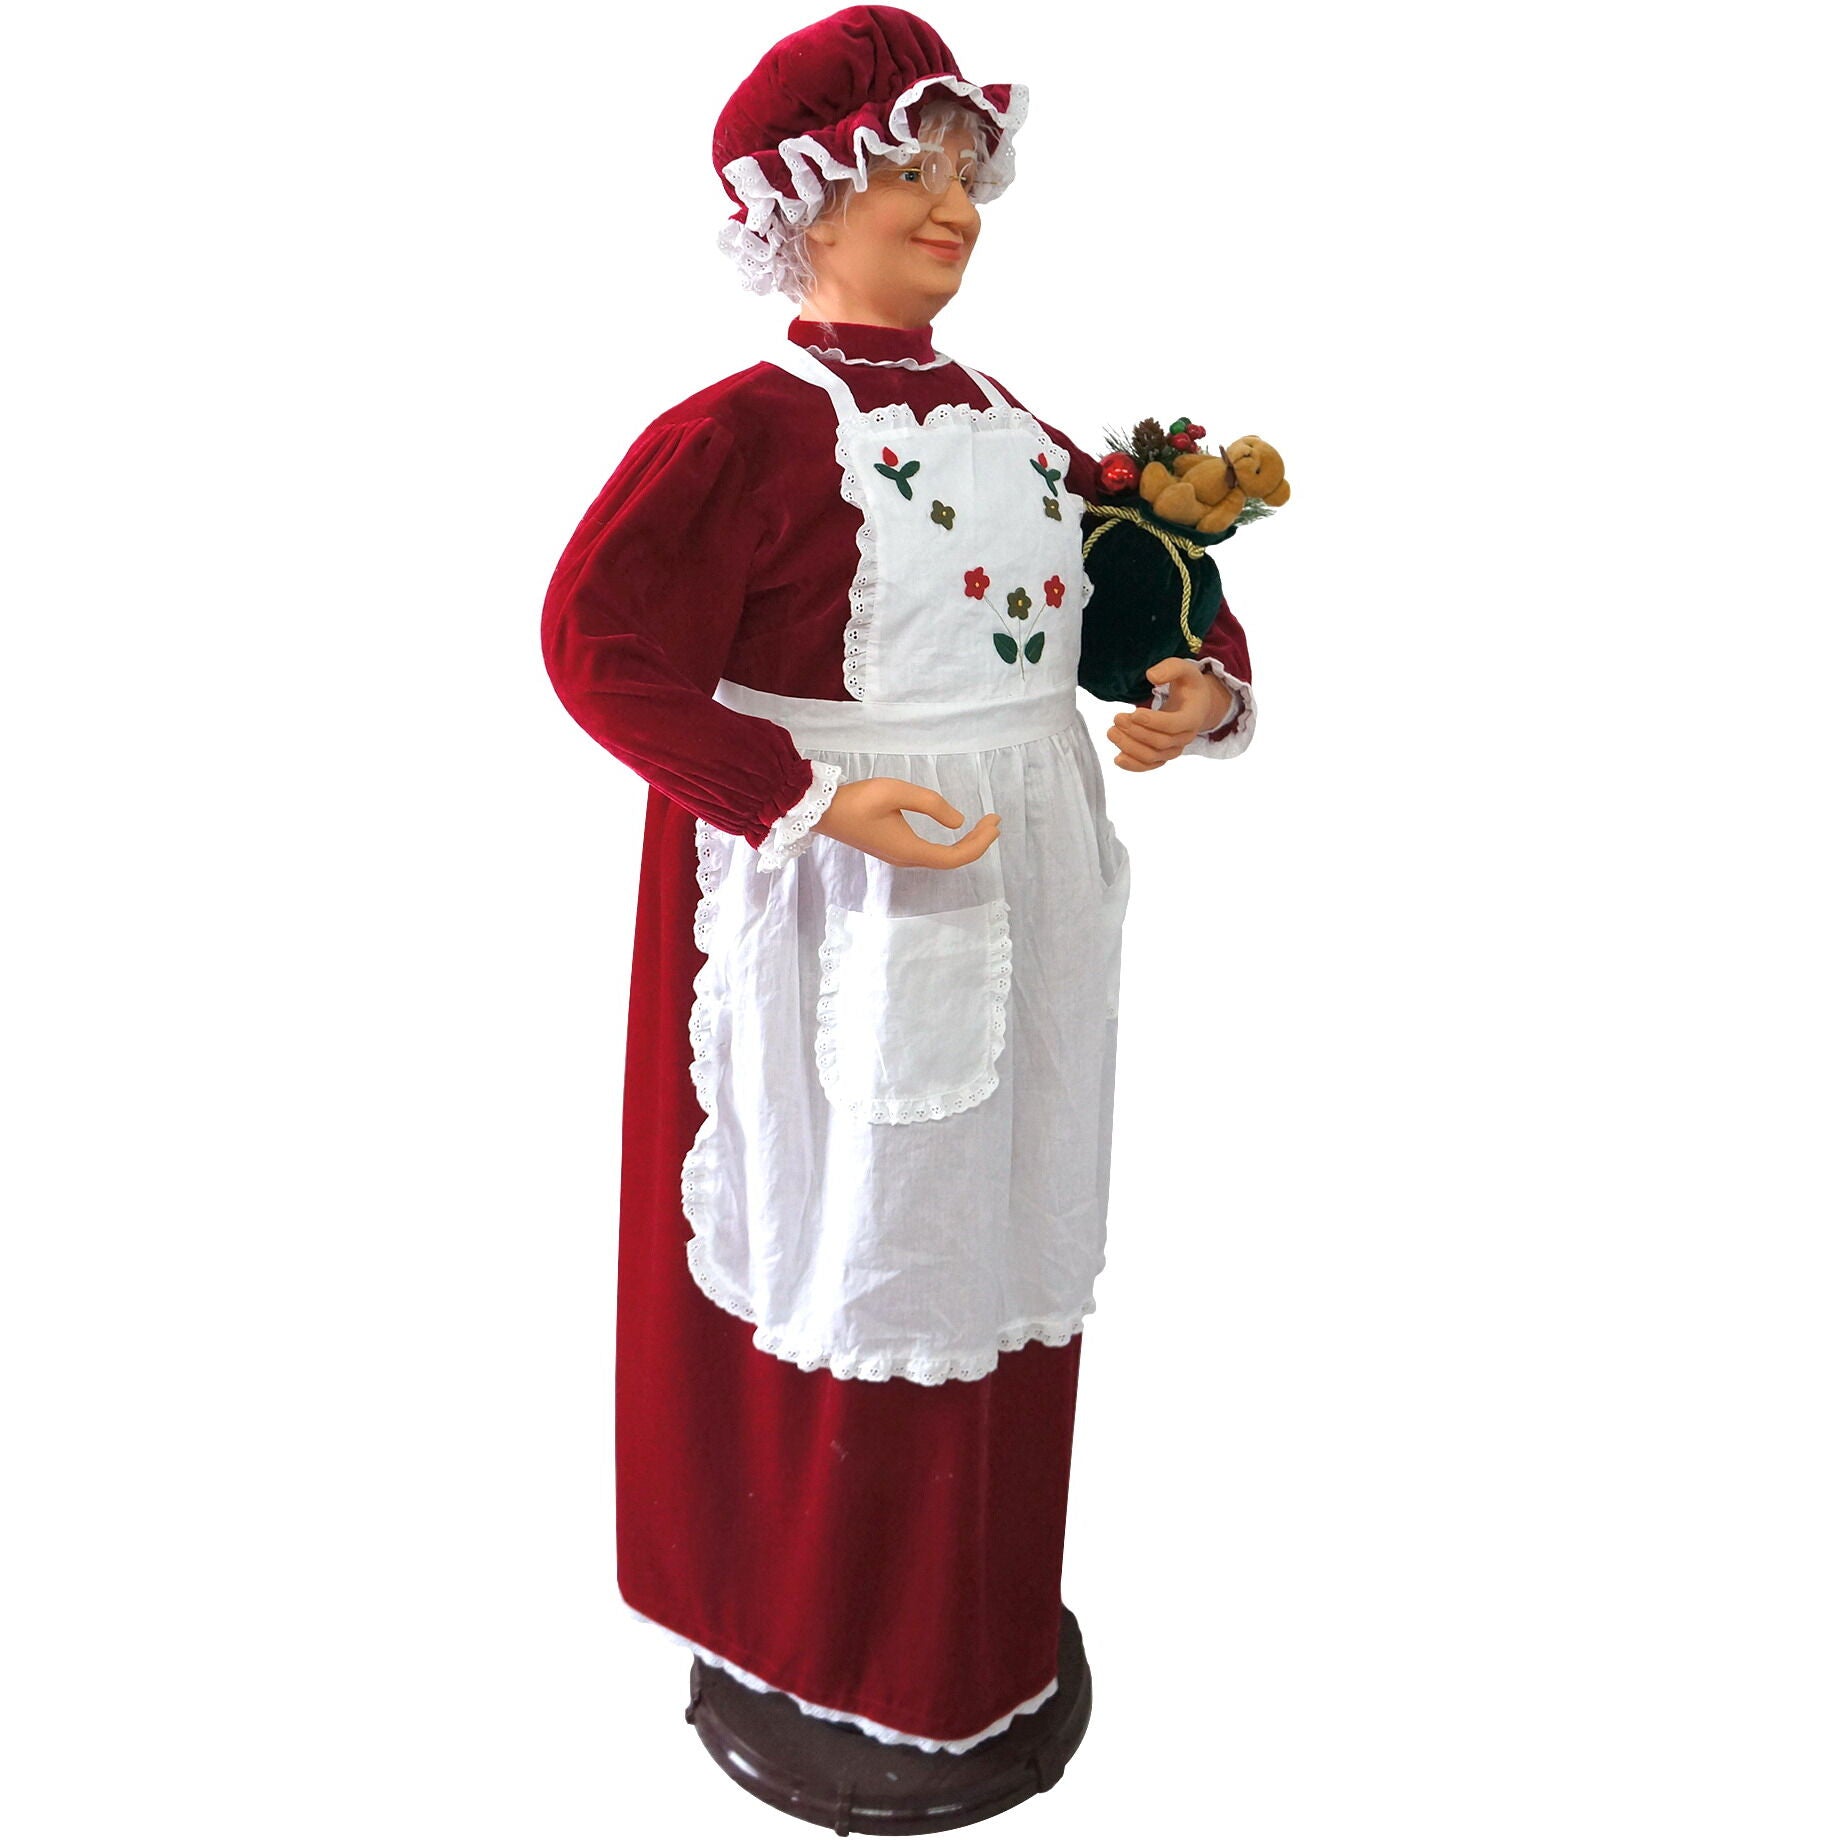 Fraser Hill Farm -  58-In. Dancing Mrs. Claus with Apron, Life-Size Motion-Activated Christmas Animatronic